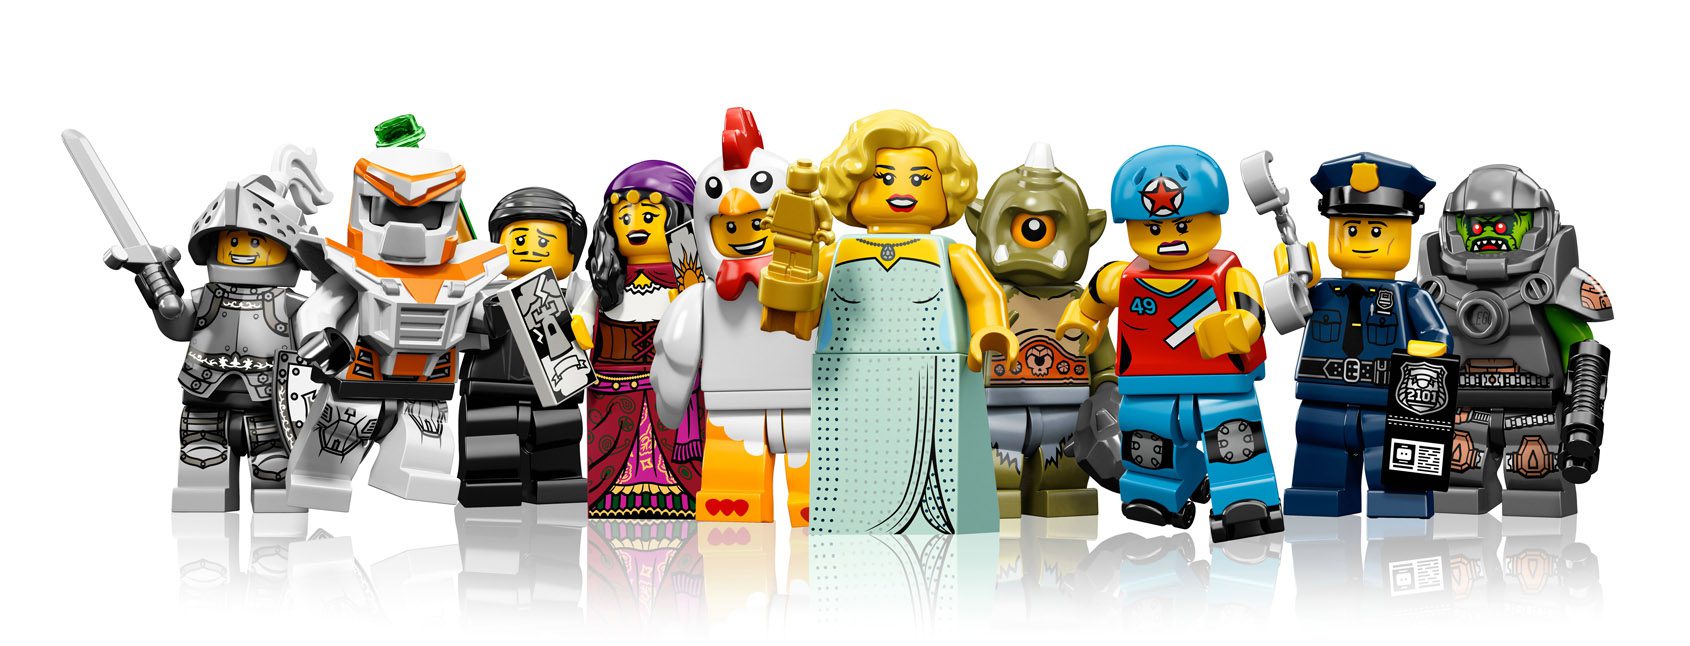 create your own lego minifigure online download free